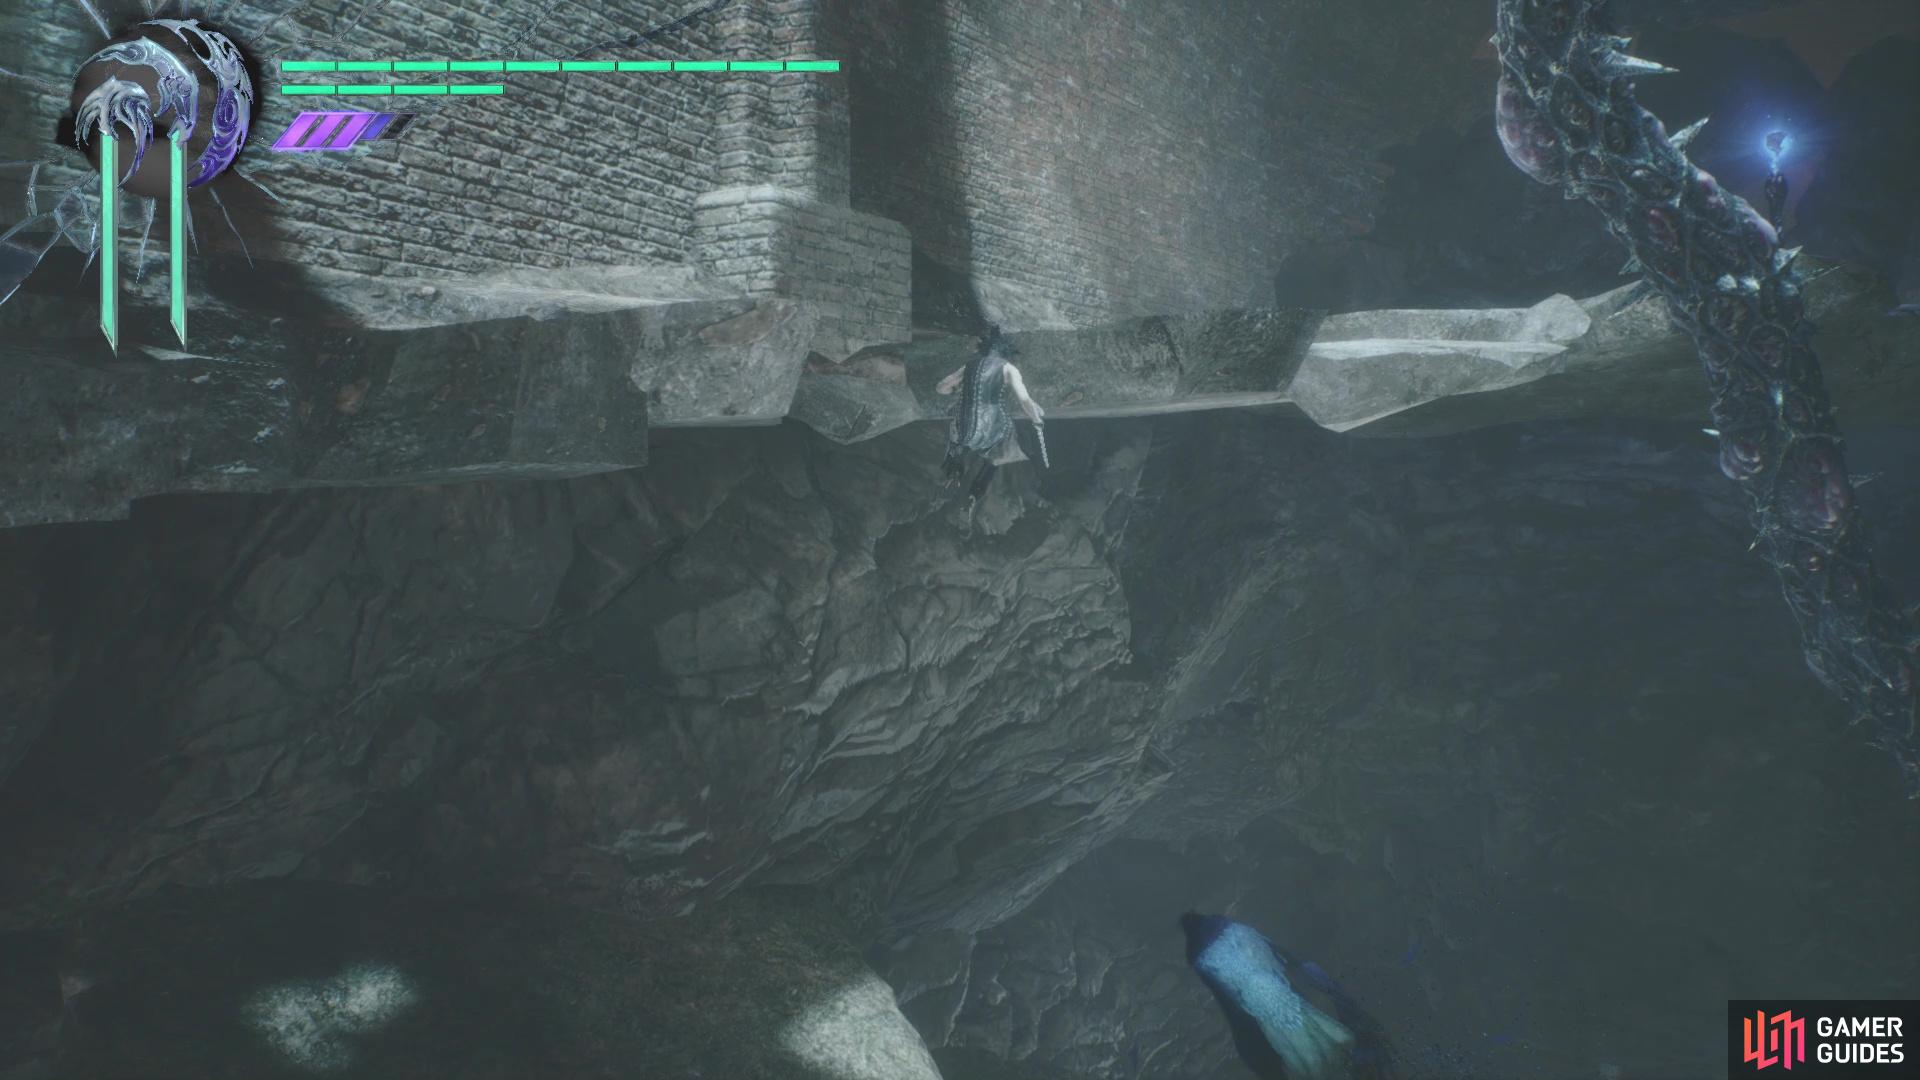 After the previous section, jump up the ledges to find a Blue Orb Fragment